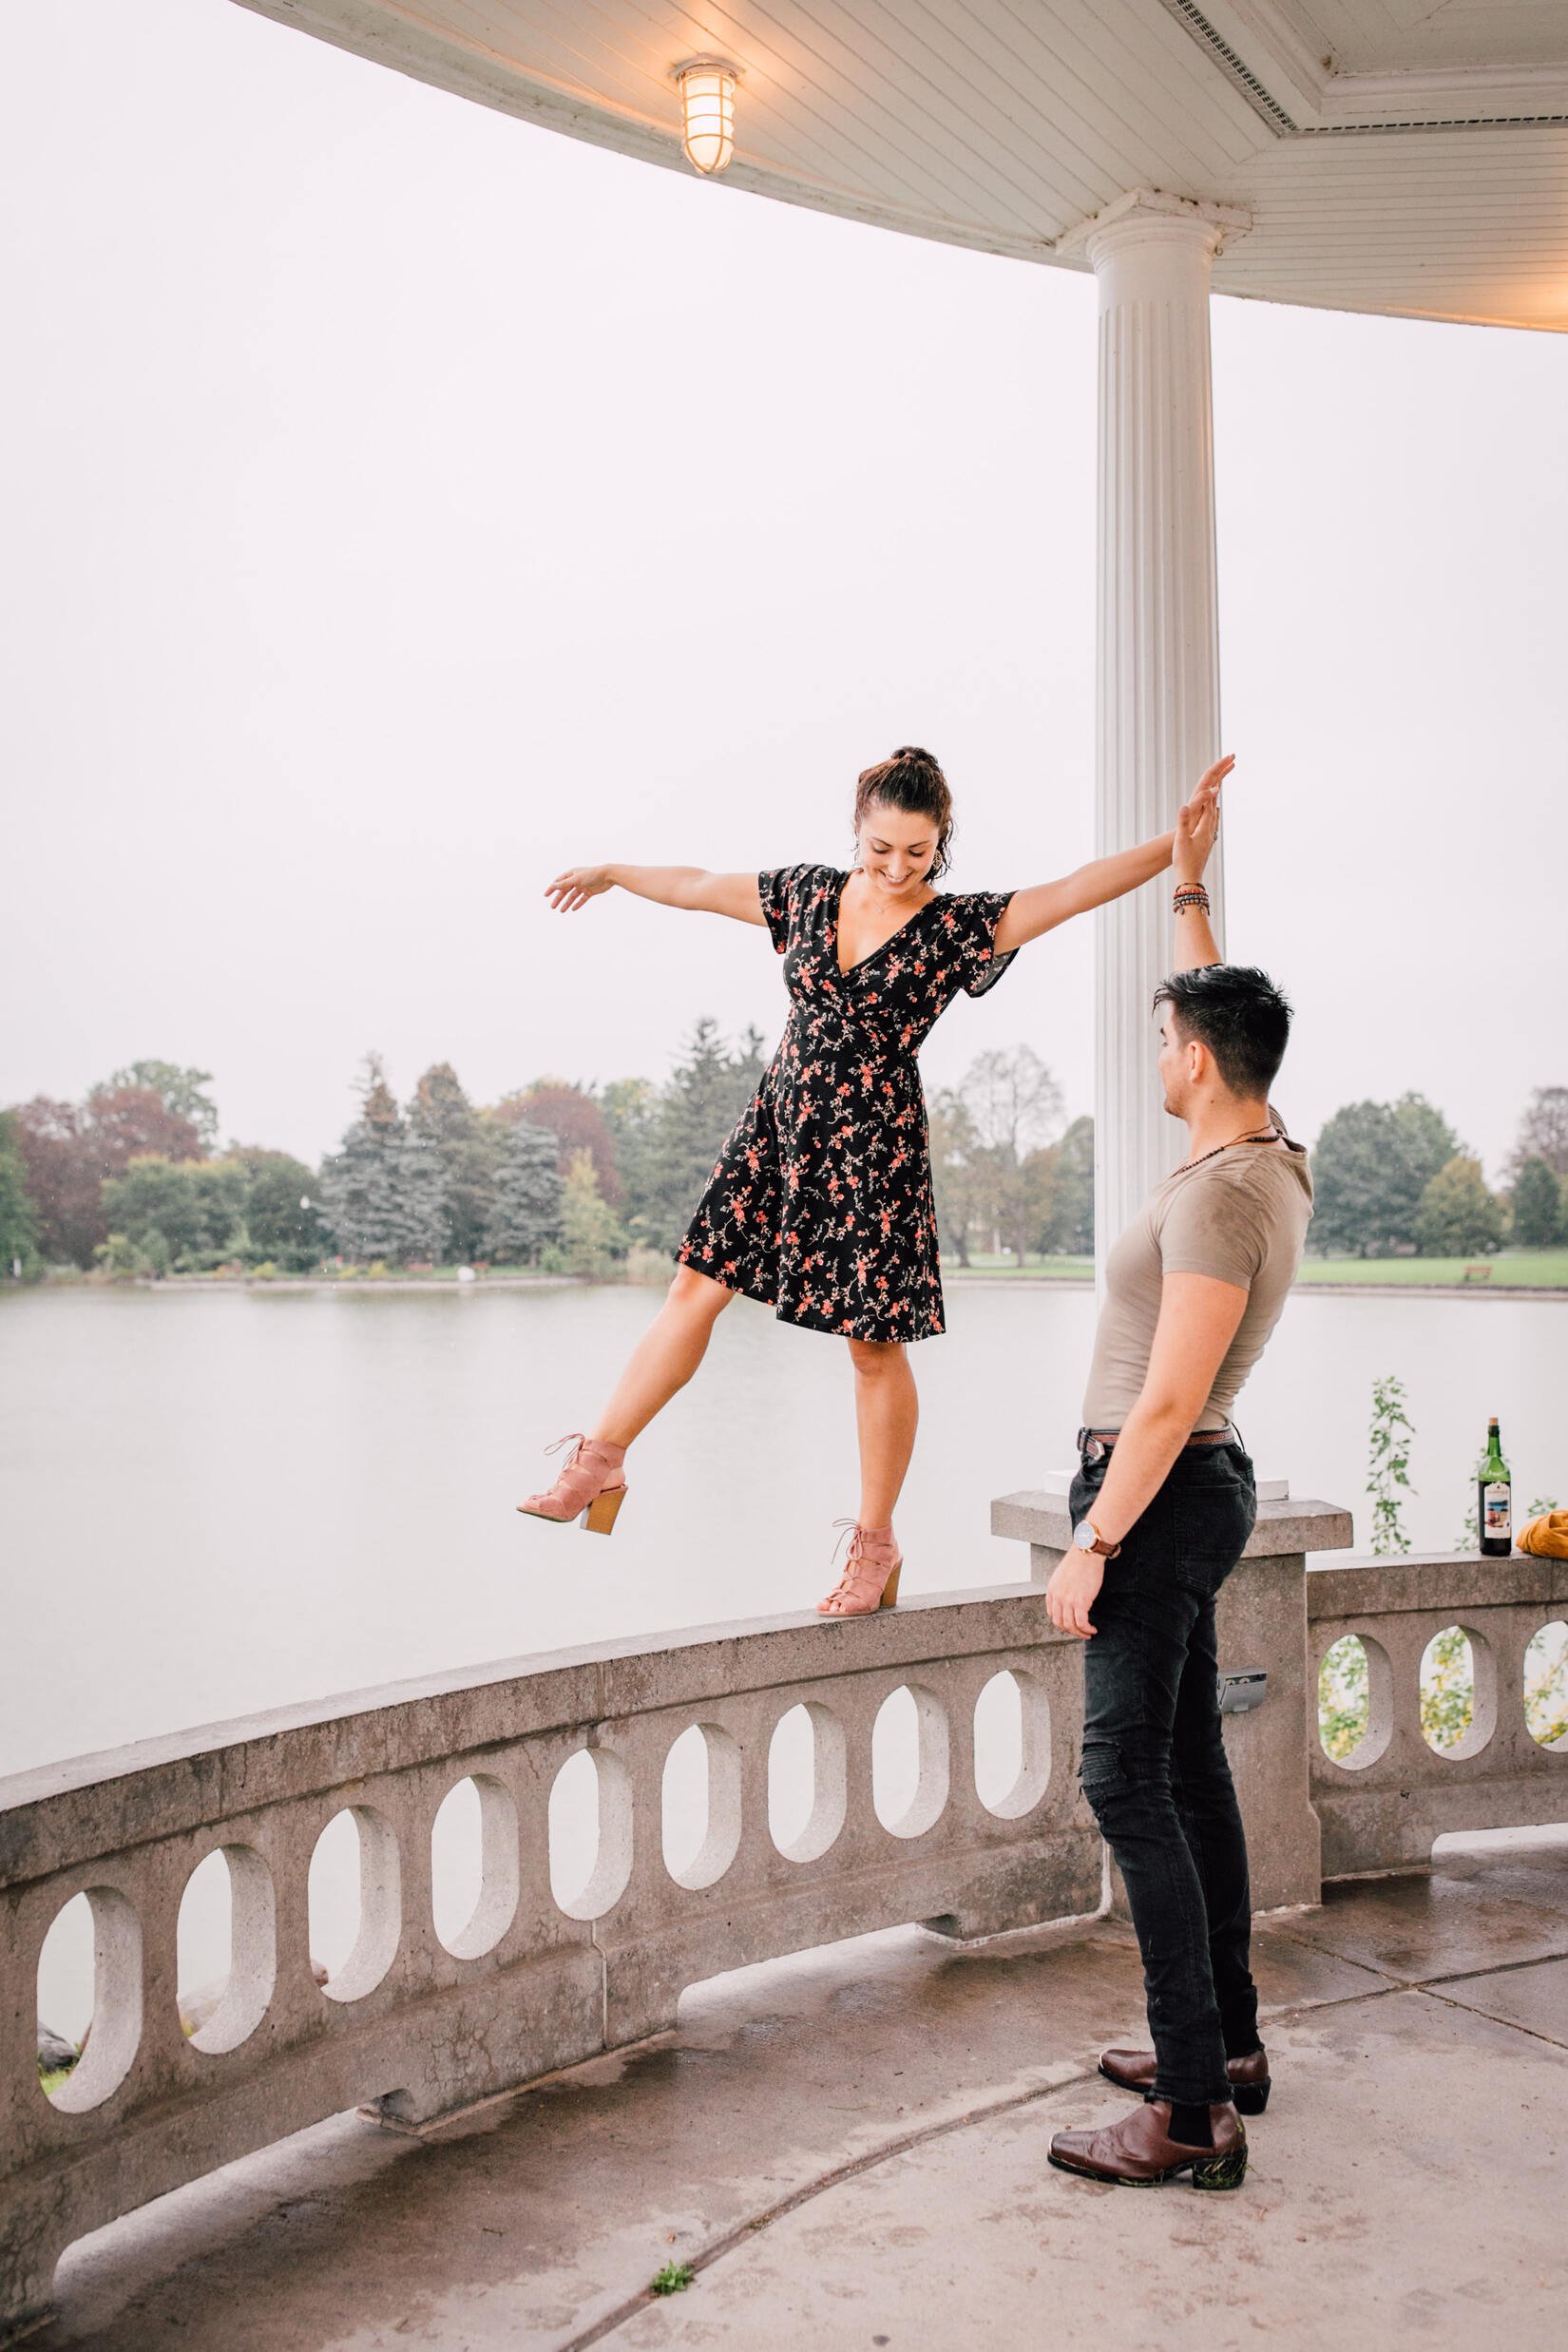  pablo supports jessica as she walks on a railing of a gazebo during their romantic photoshoot  